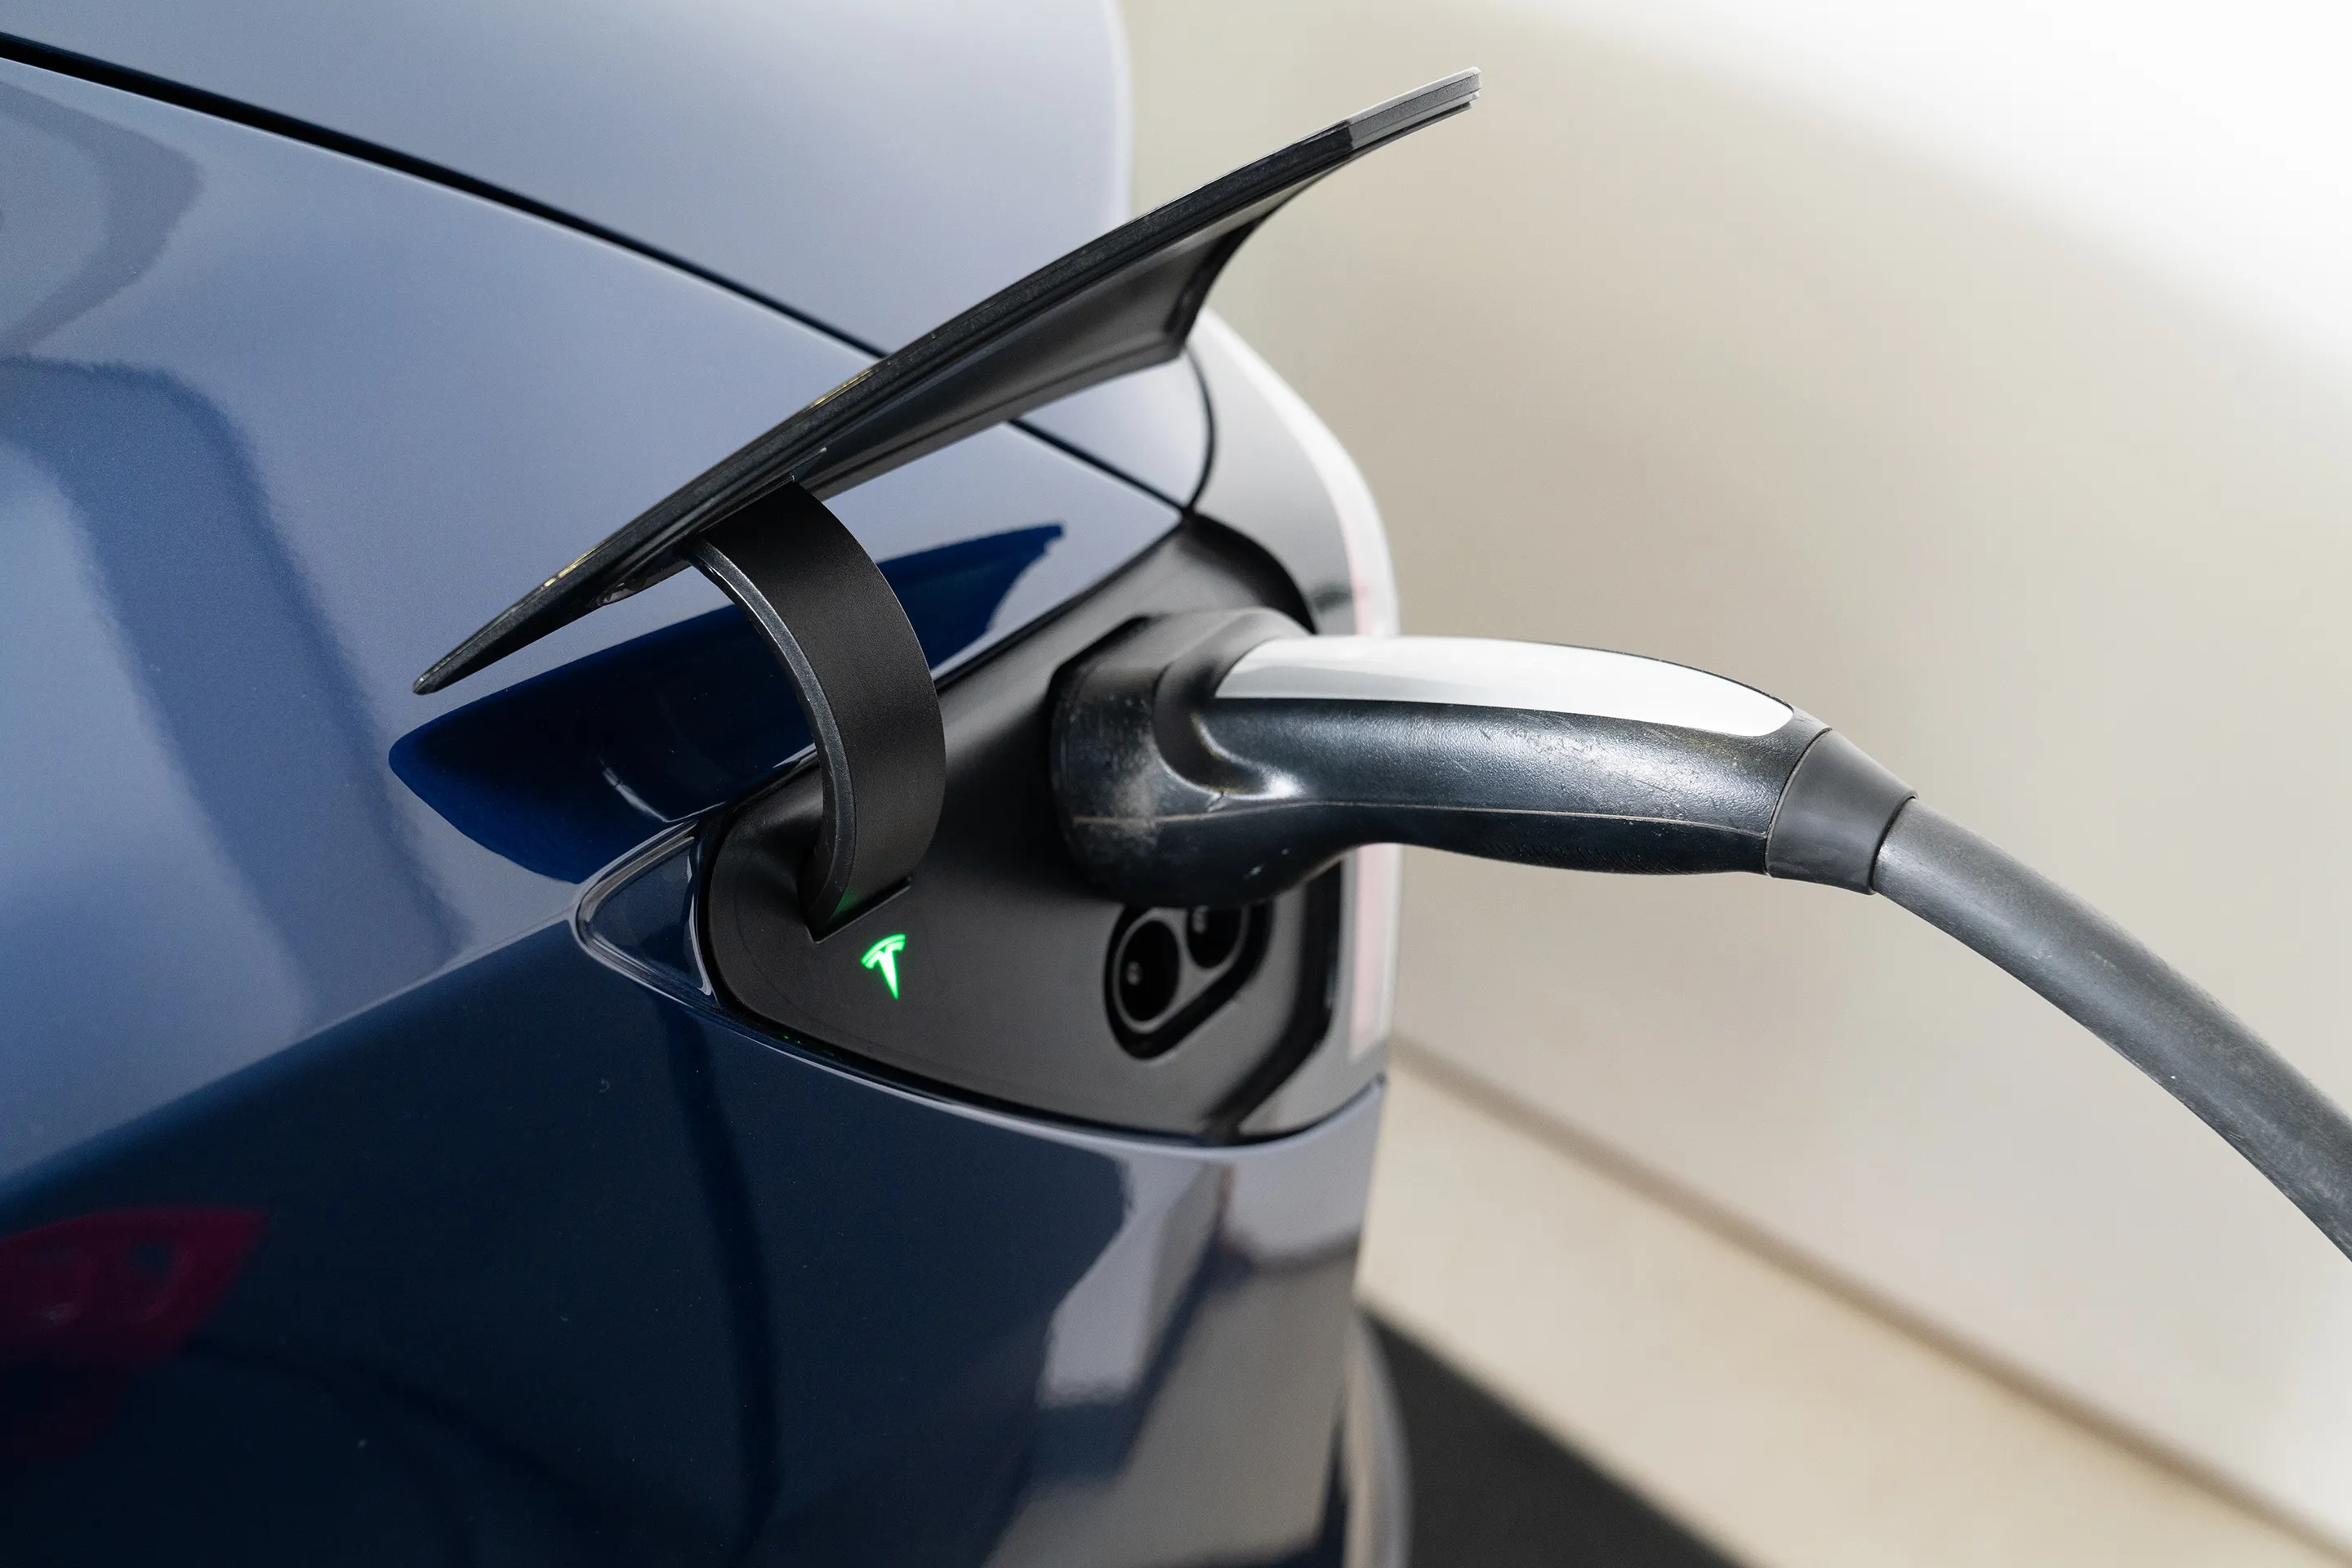 EVs That Qualify for $7,500 Federal Tax Credits in 2023